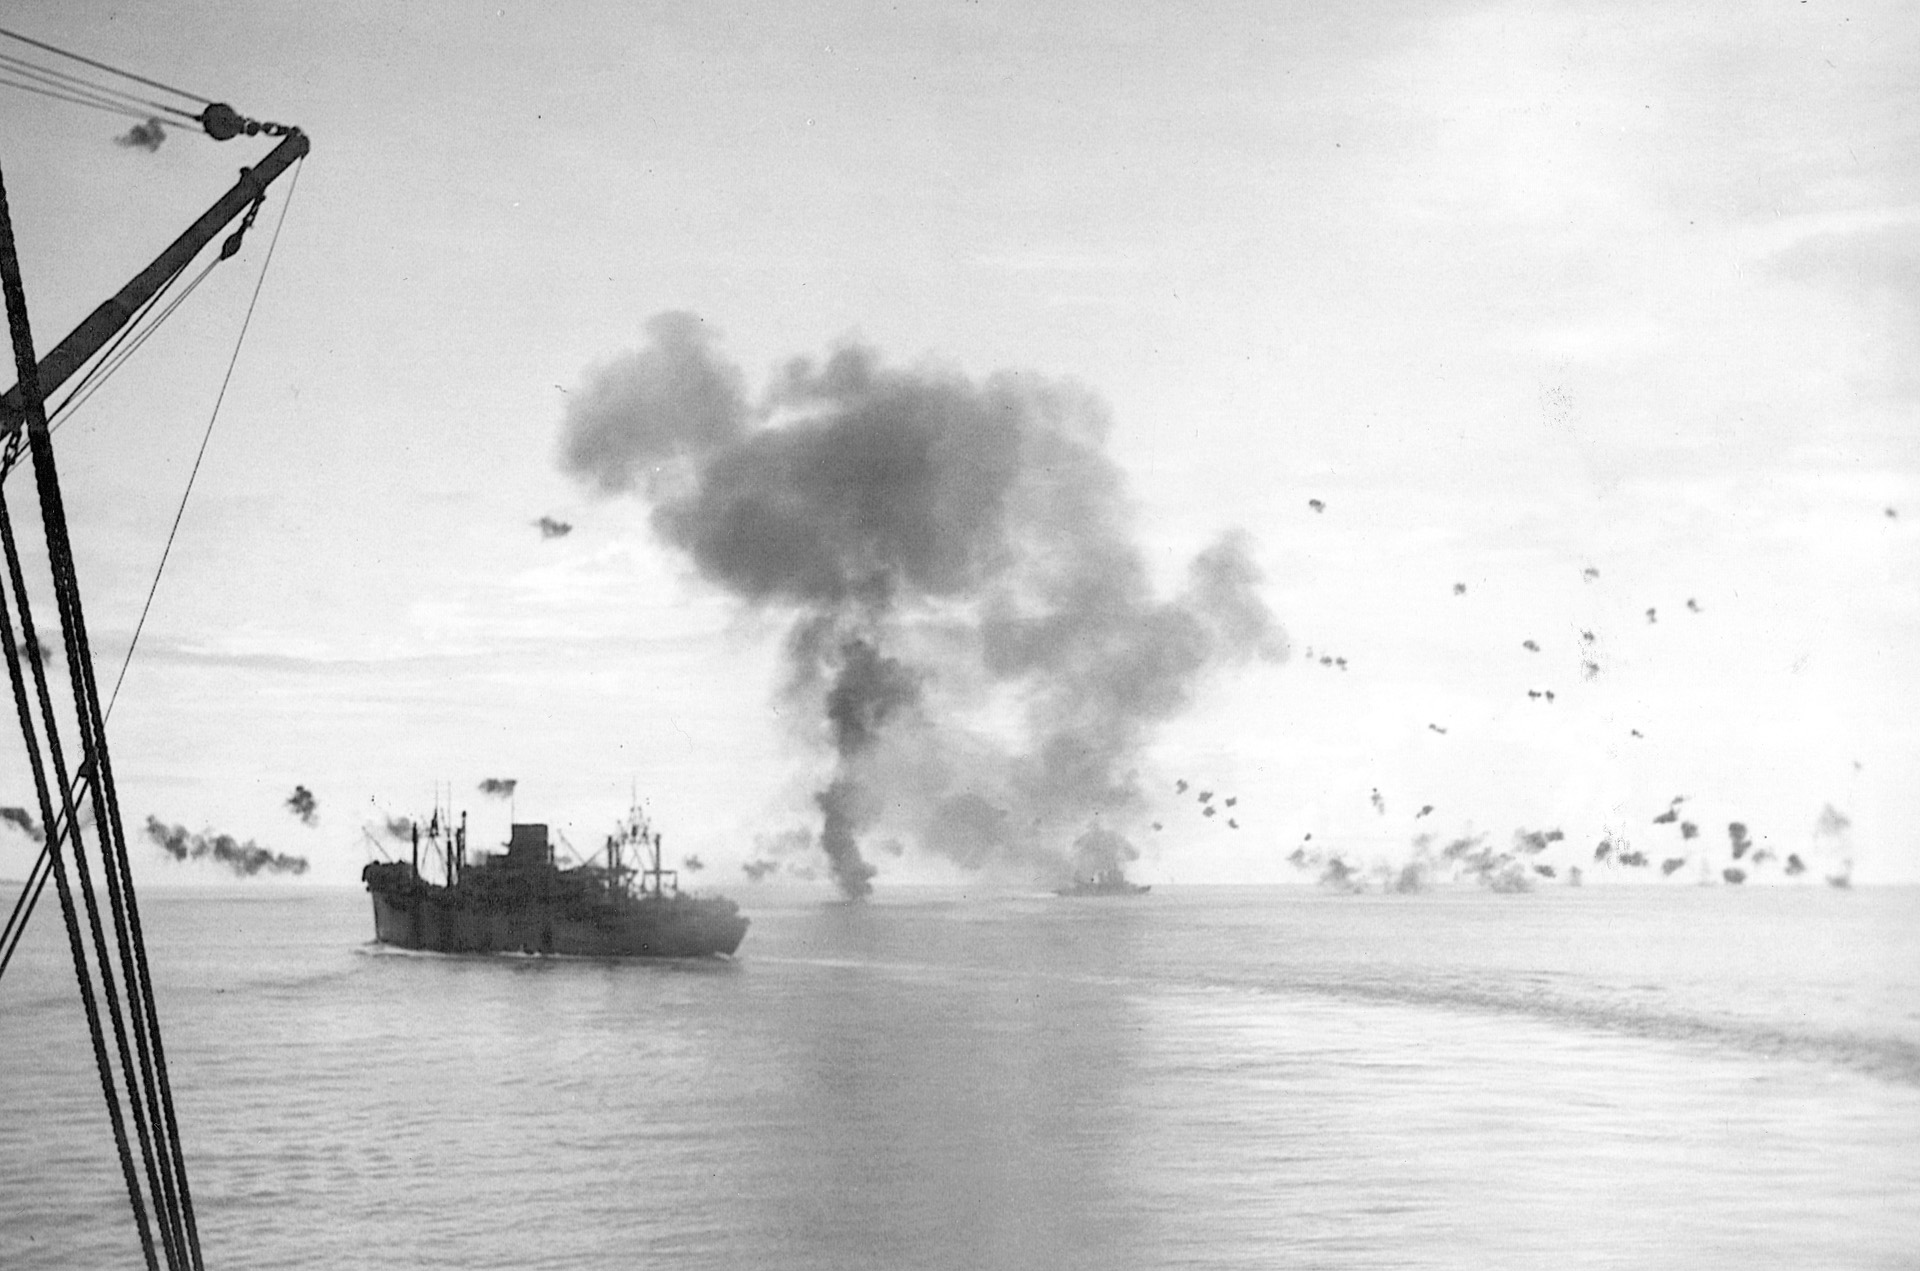 The USS President Jackson turns hard to port while in the distance the USS San Francisco burns from damage inflicted by a suicidal Betty bomber.